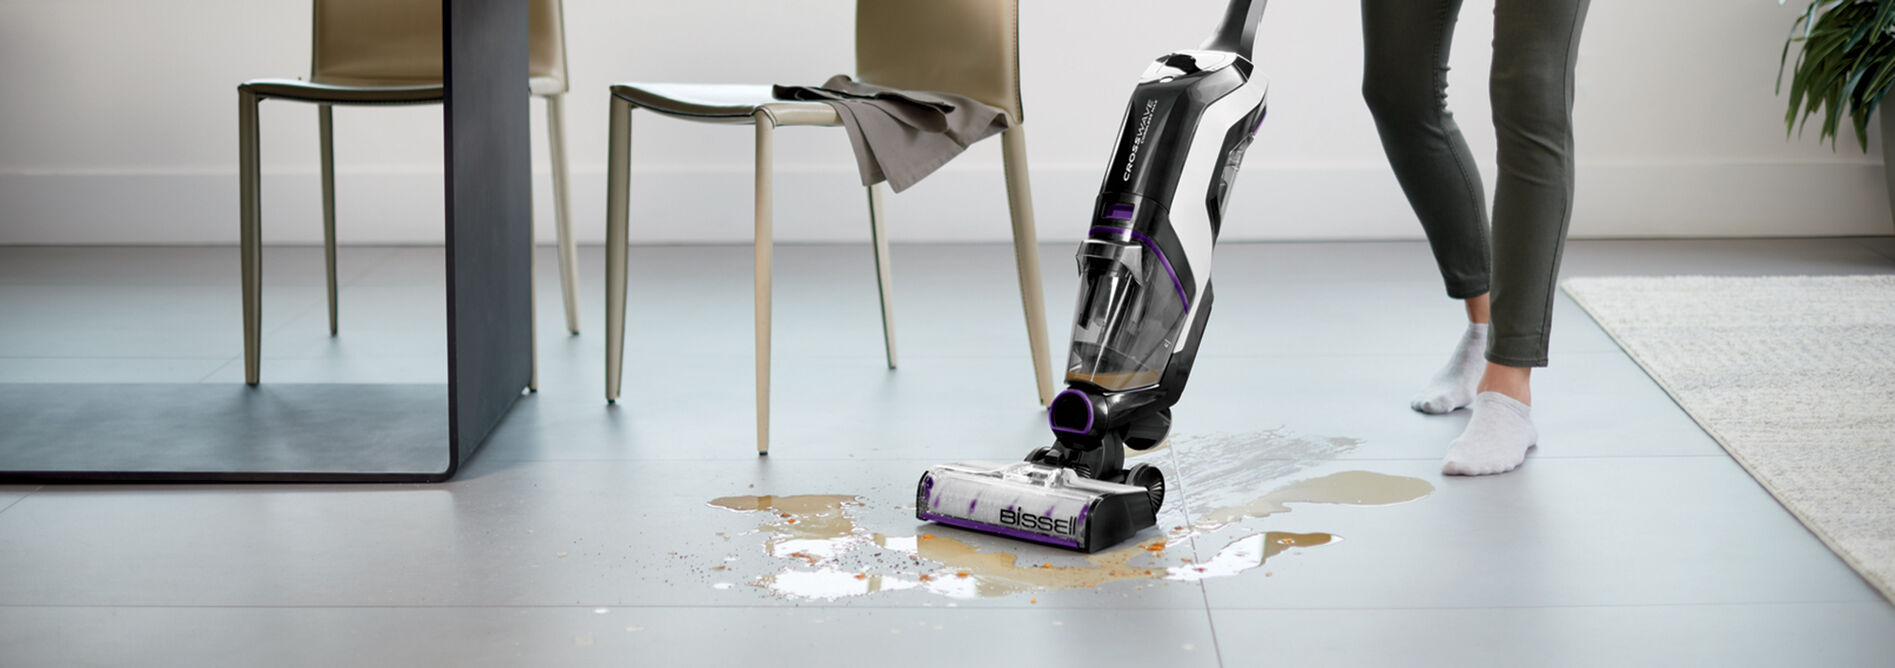 BISSELL CrossWave Cordless MAX Floor and Carpet Cleaner with Wet-Dry Vacuum